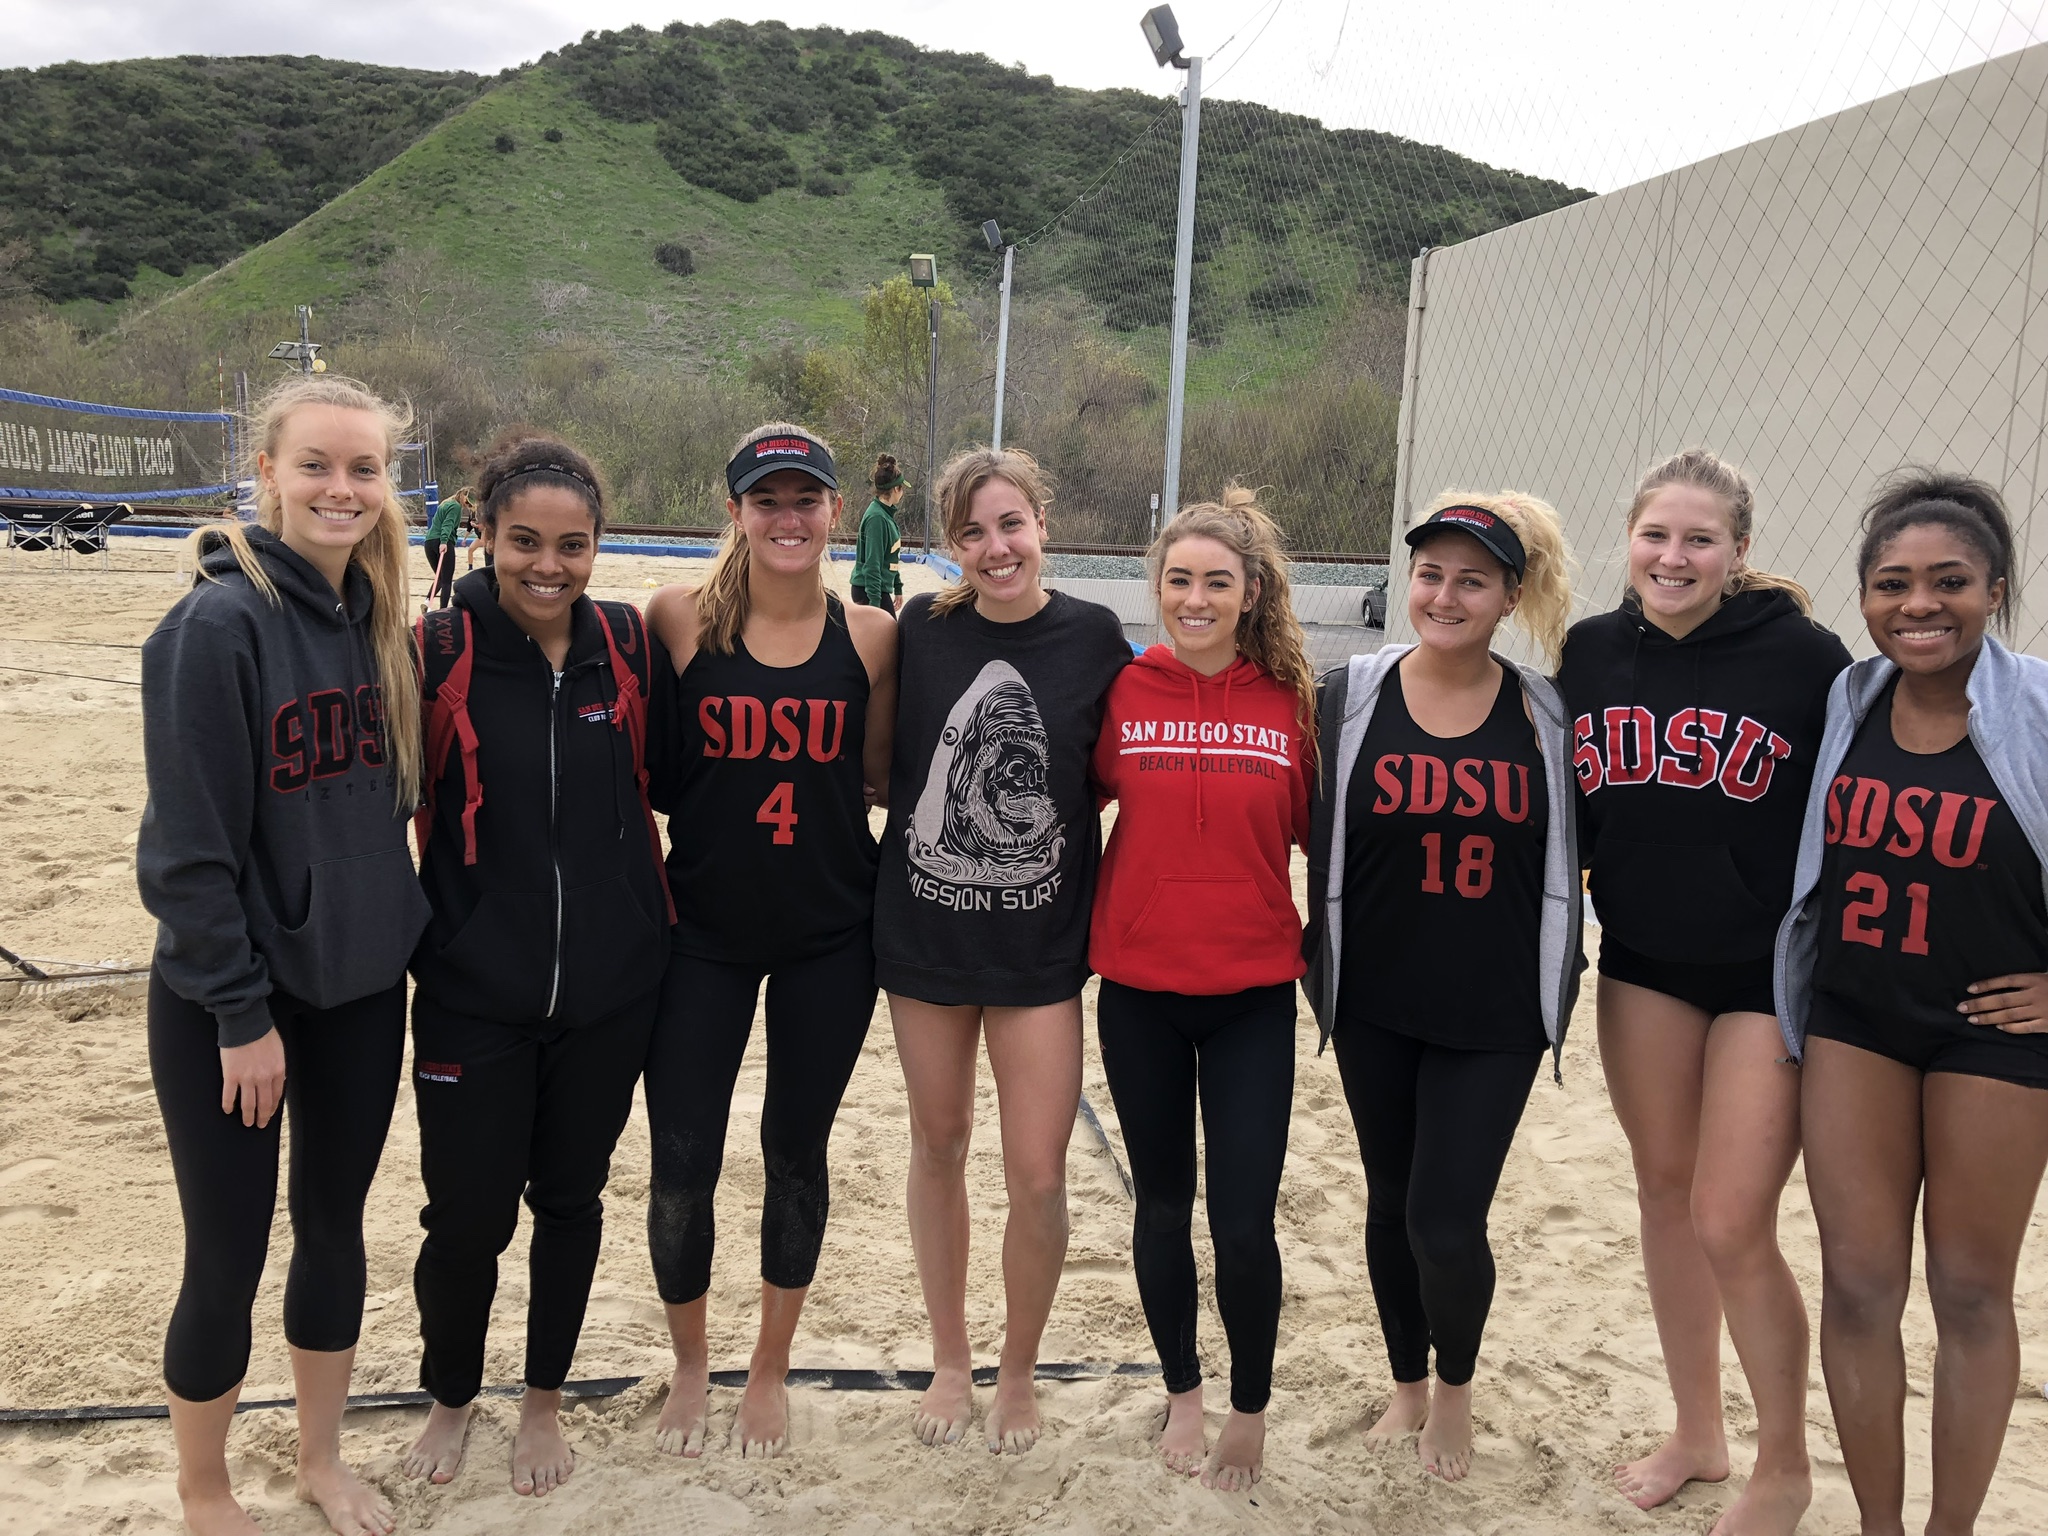 Nina Capuani (third from right) photographed with her Club Beach Volleyball Team.